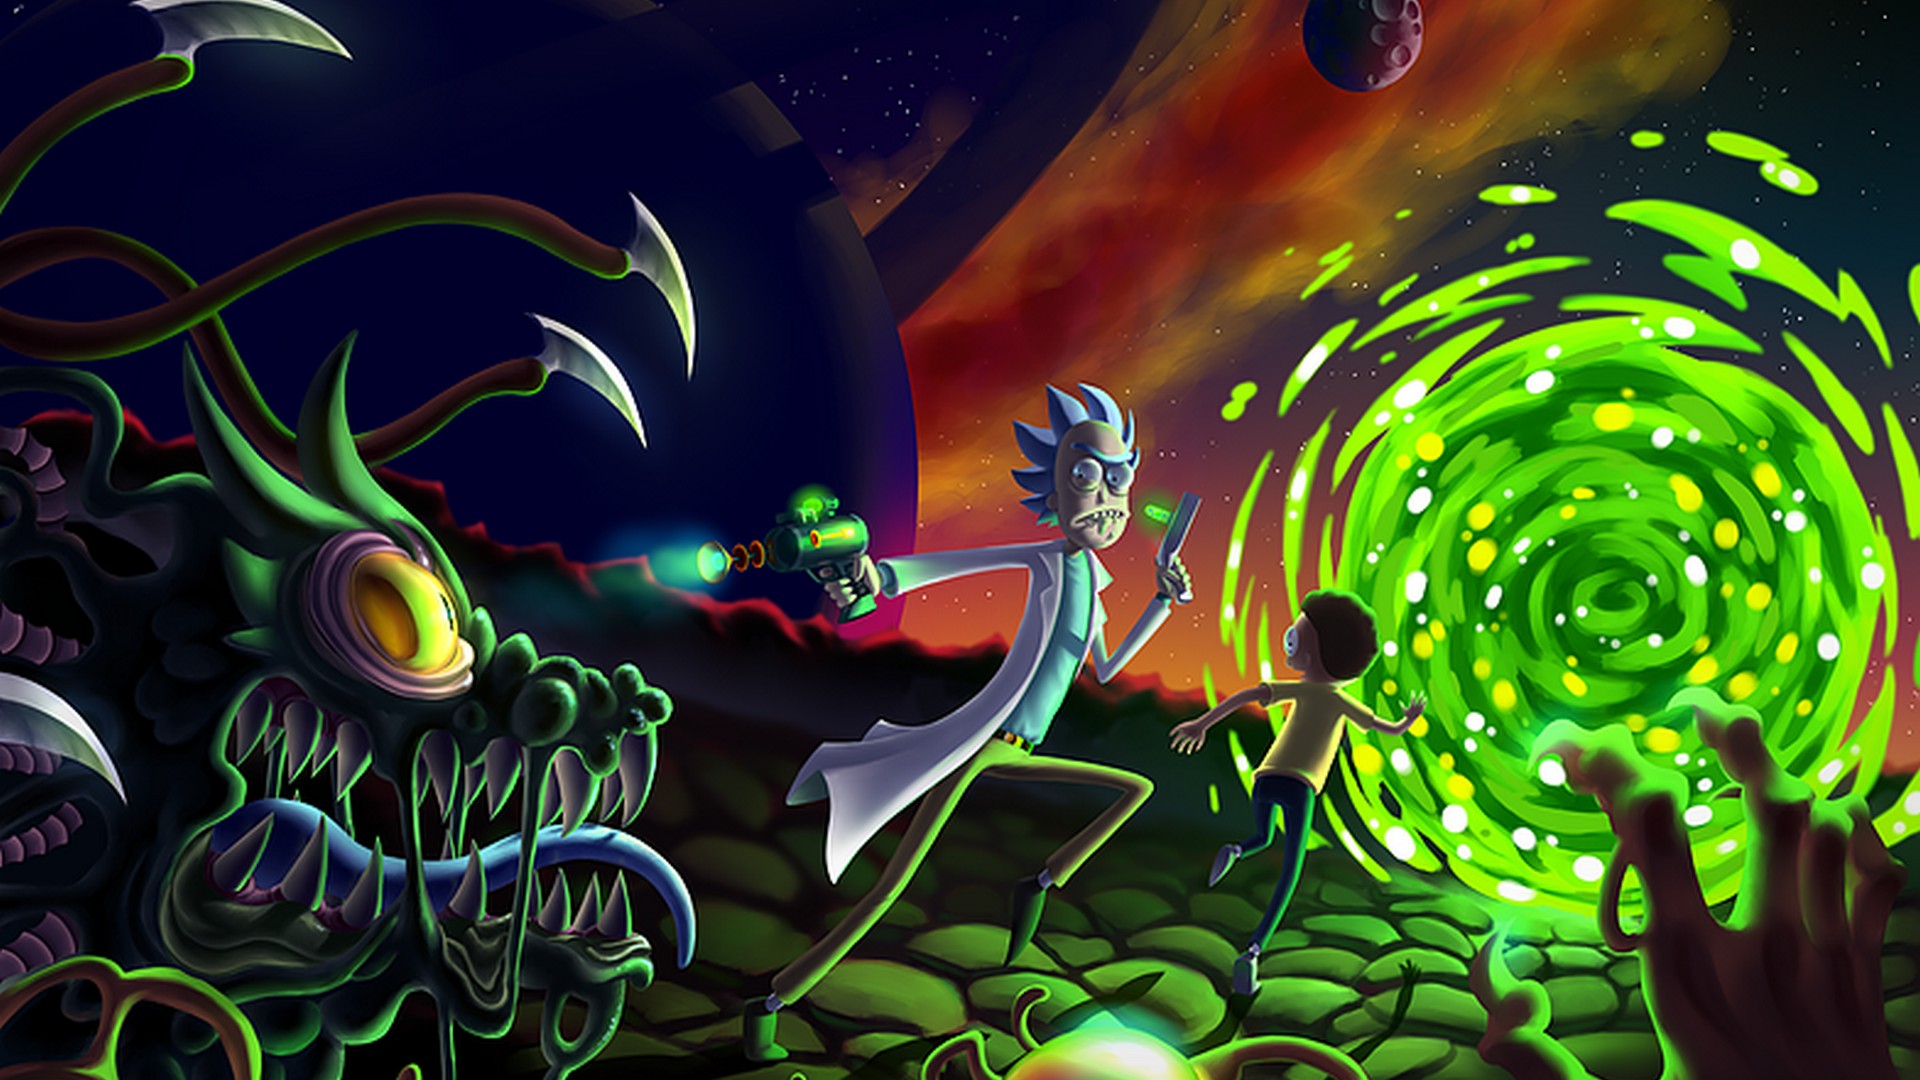 rick and morty wallpaper 1920x1080,illustration,art,organism,fictional character,graphic design